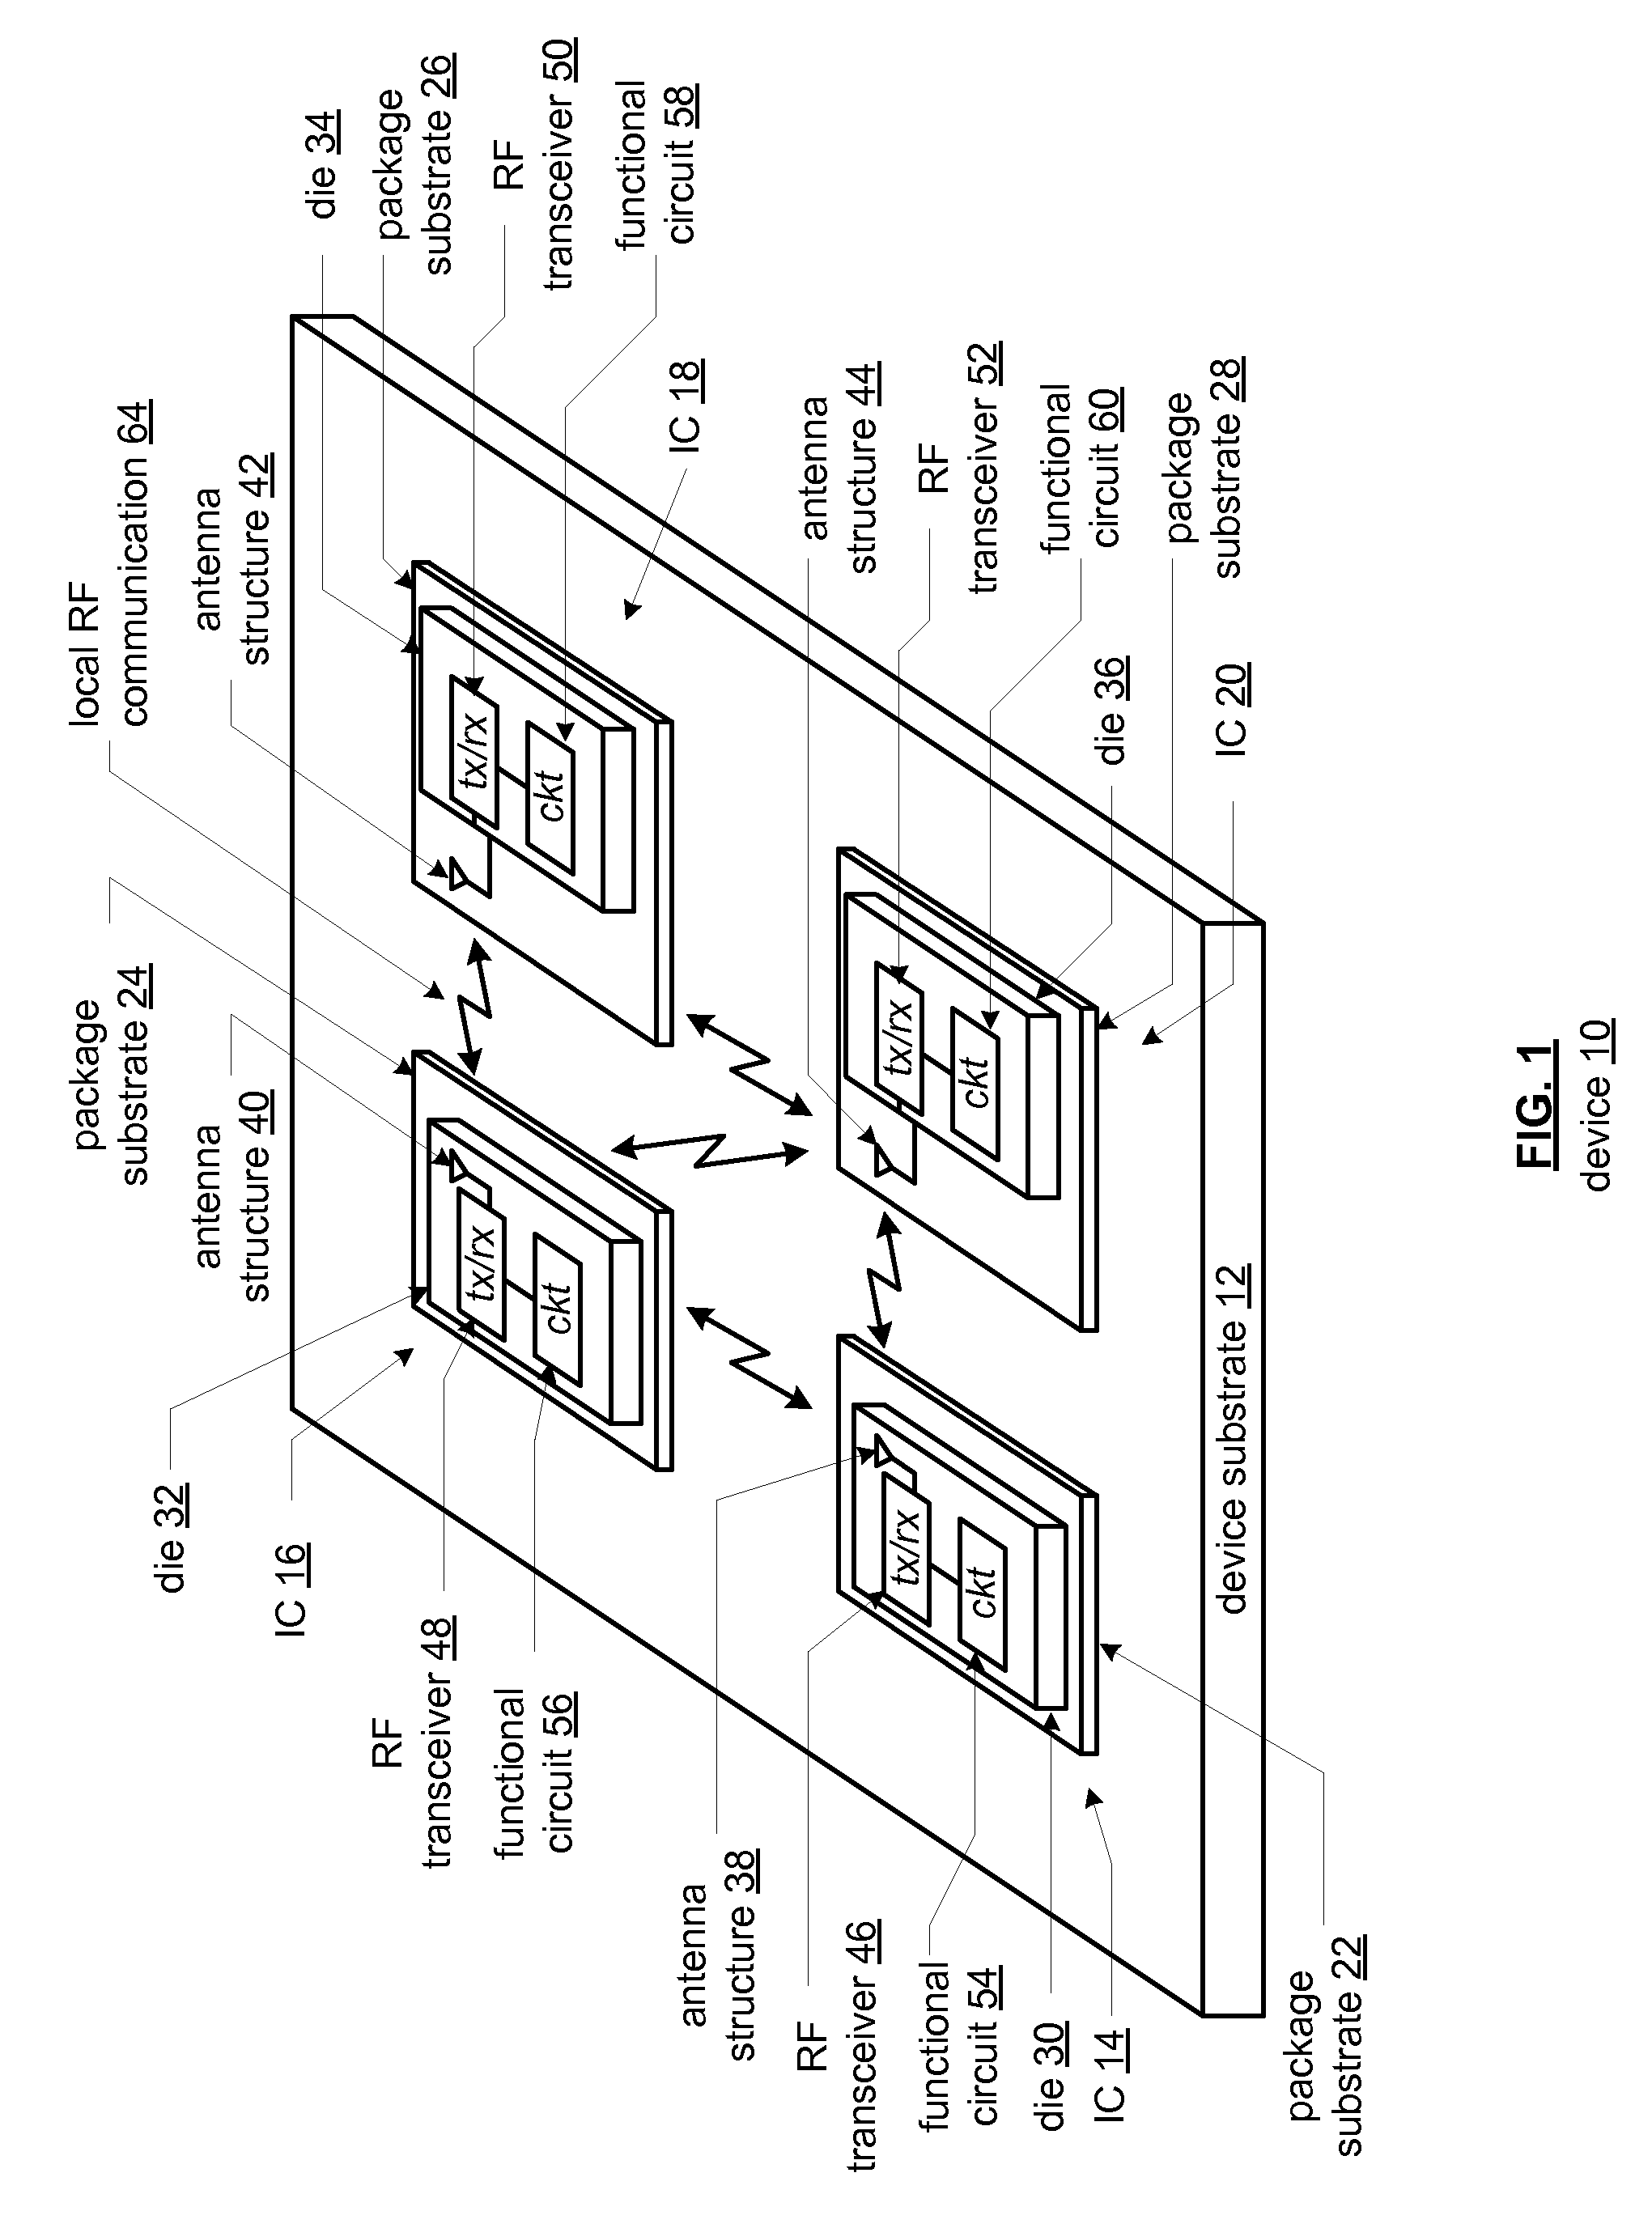 Reconfigurable MIMO transceiver and method for use therewith